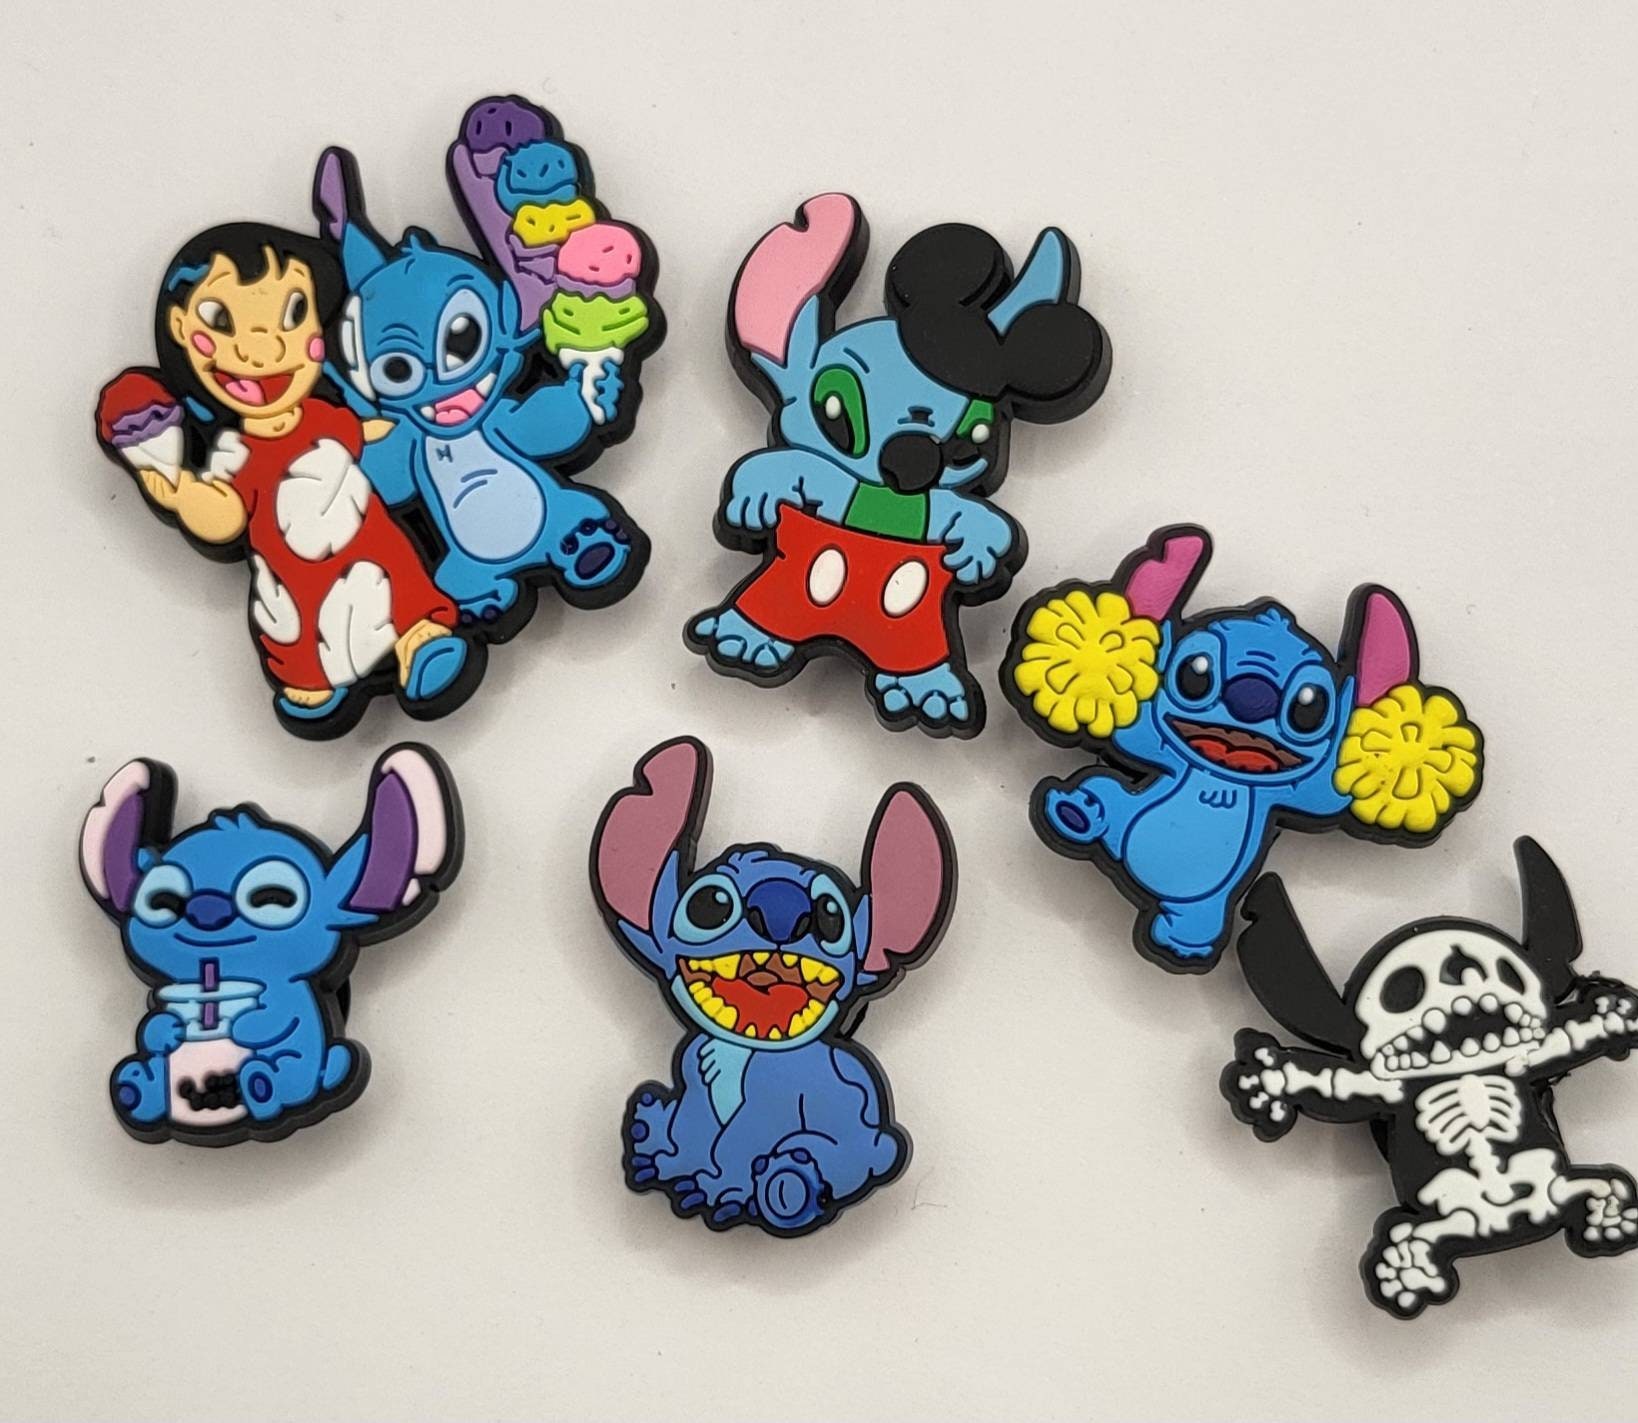 SUU 14pcs Anime Stitch Charms for Jewelry Making, Enamel Cartoon Stitch Pendant Charm for Bracelets and Necklaces or Earrings Crafting, Assorted Charm